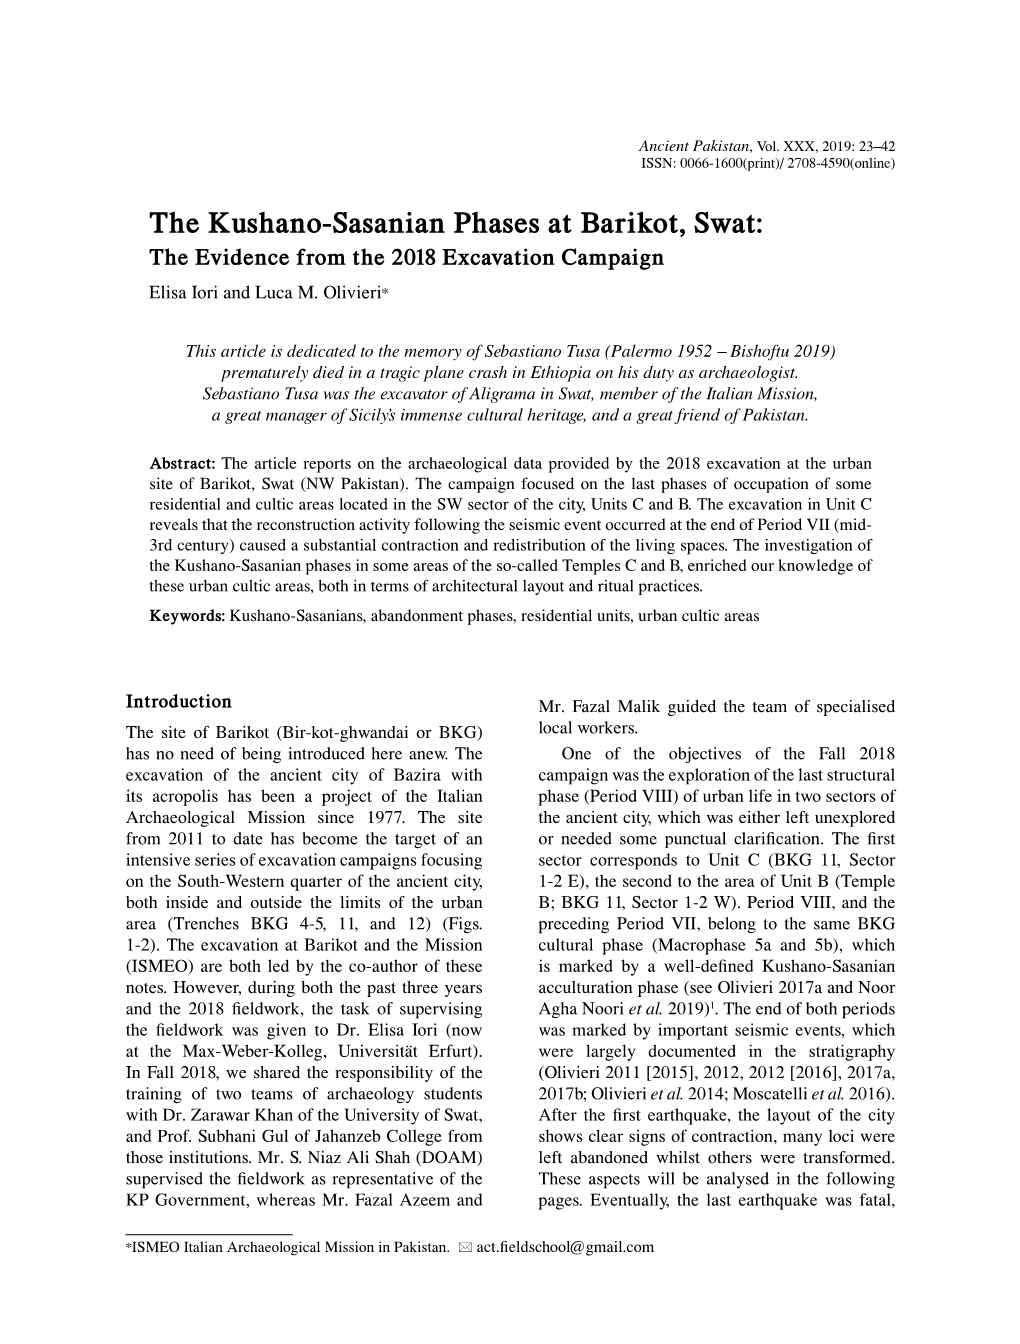 The Kushano-Sasanian Phases at Barikot, Swat: the Evidence from the 2018 Excavation Campaign